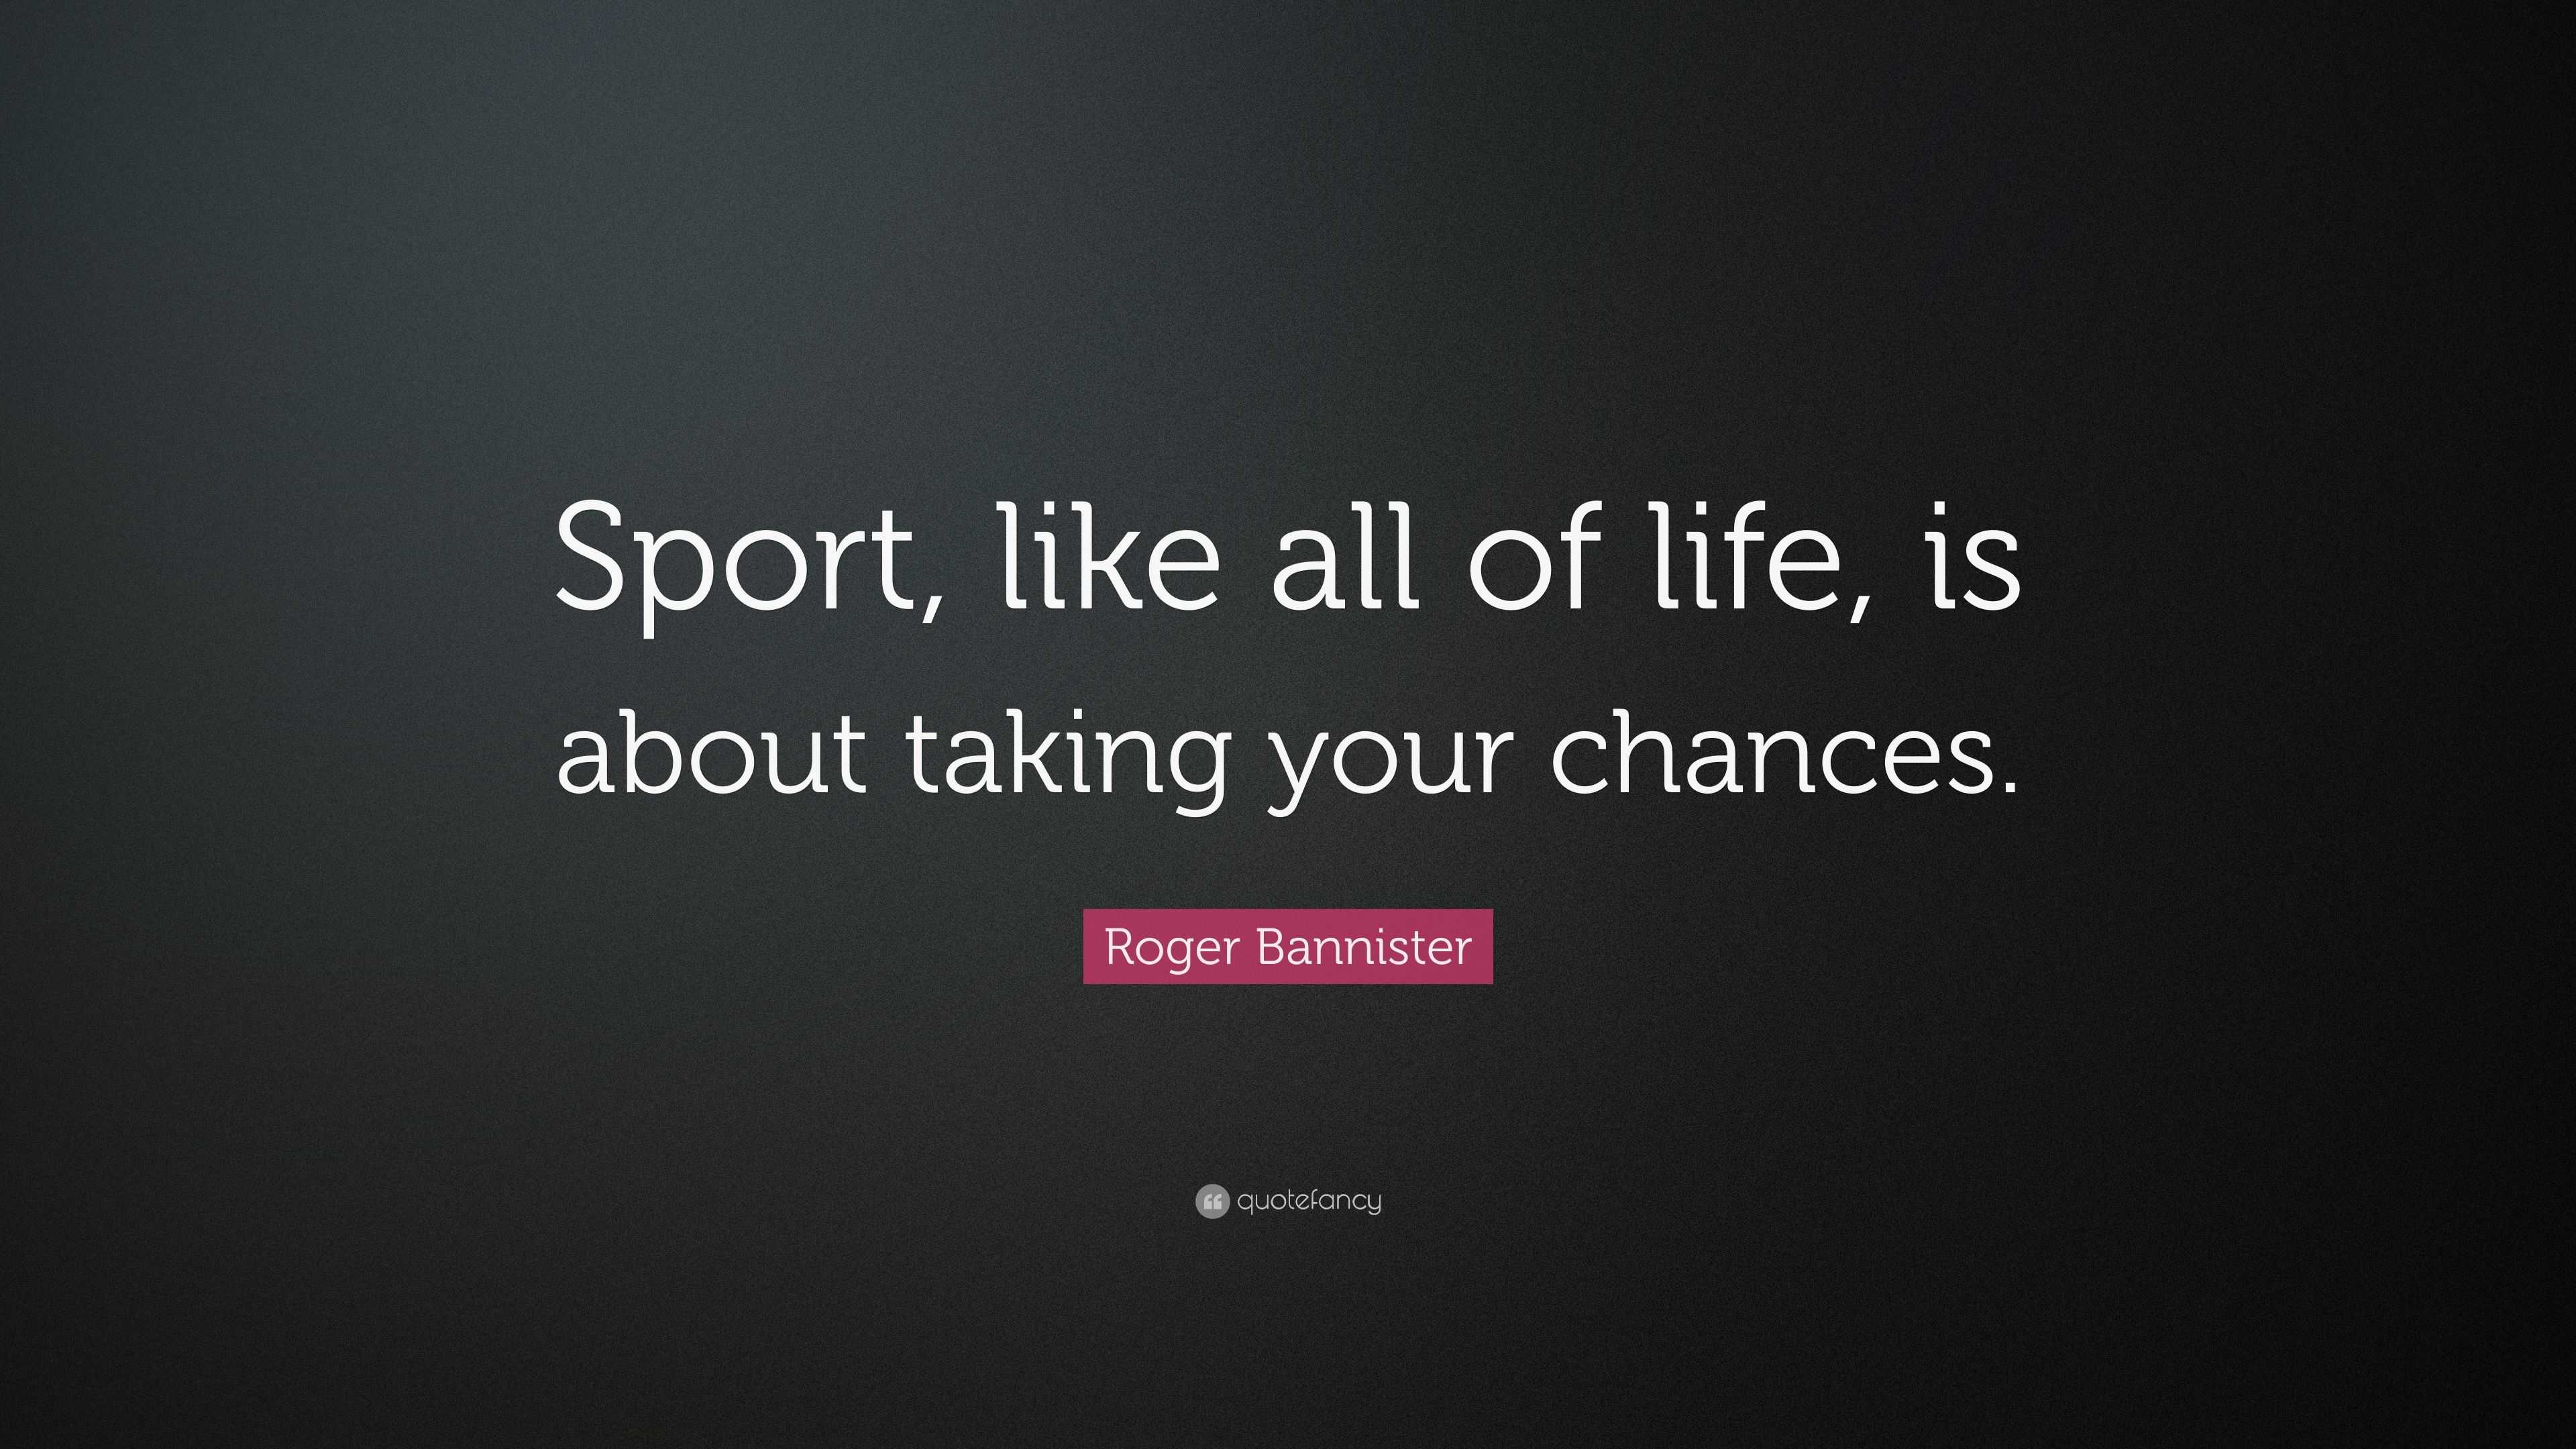 Roger Bannister Quote: “Sport, like all of life, is about taking your ...